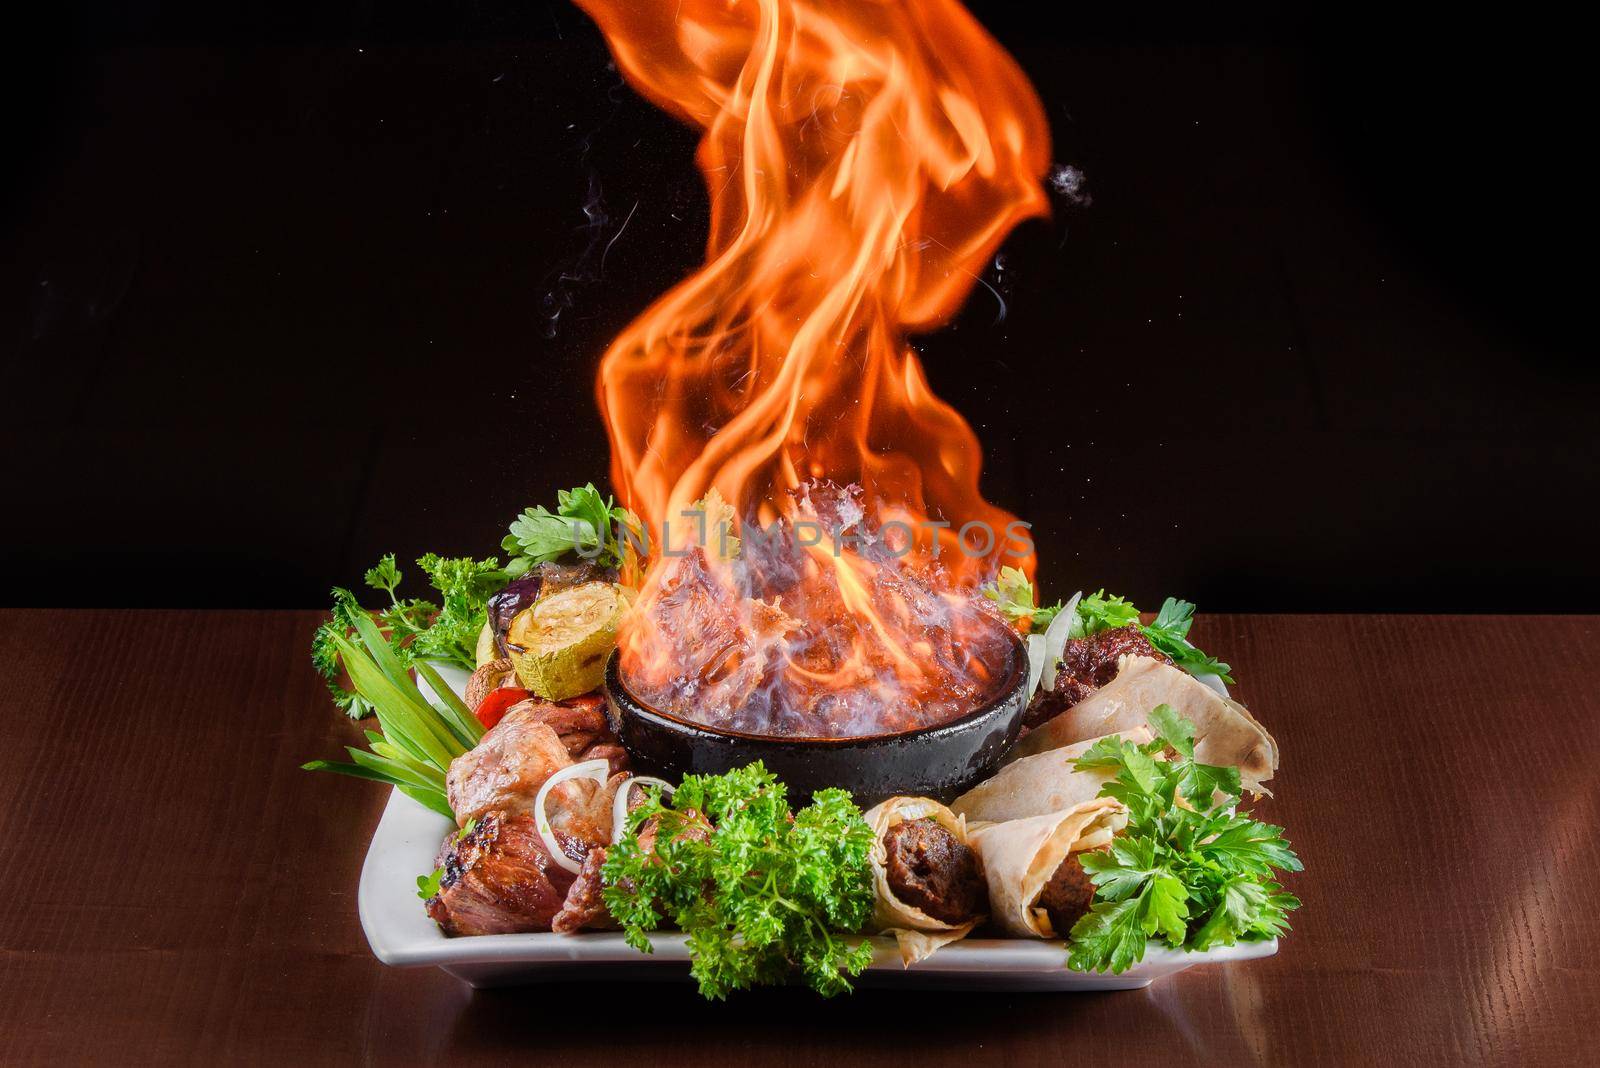 Flame meat in a clay bowl. Meat with fire on plate with grilled vegetables, kebab in pita bread decorated with herbs by Rabizo